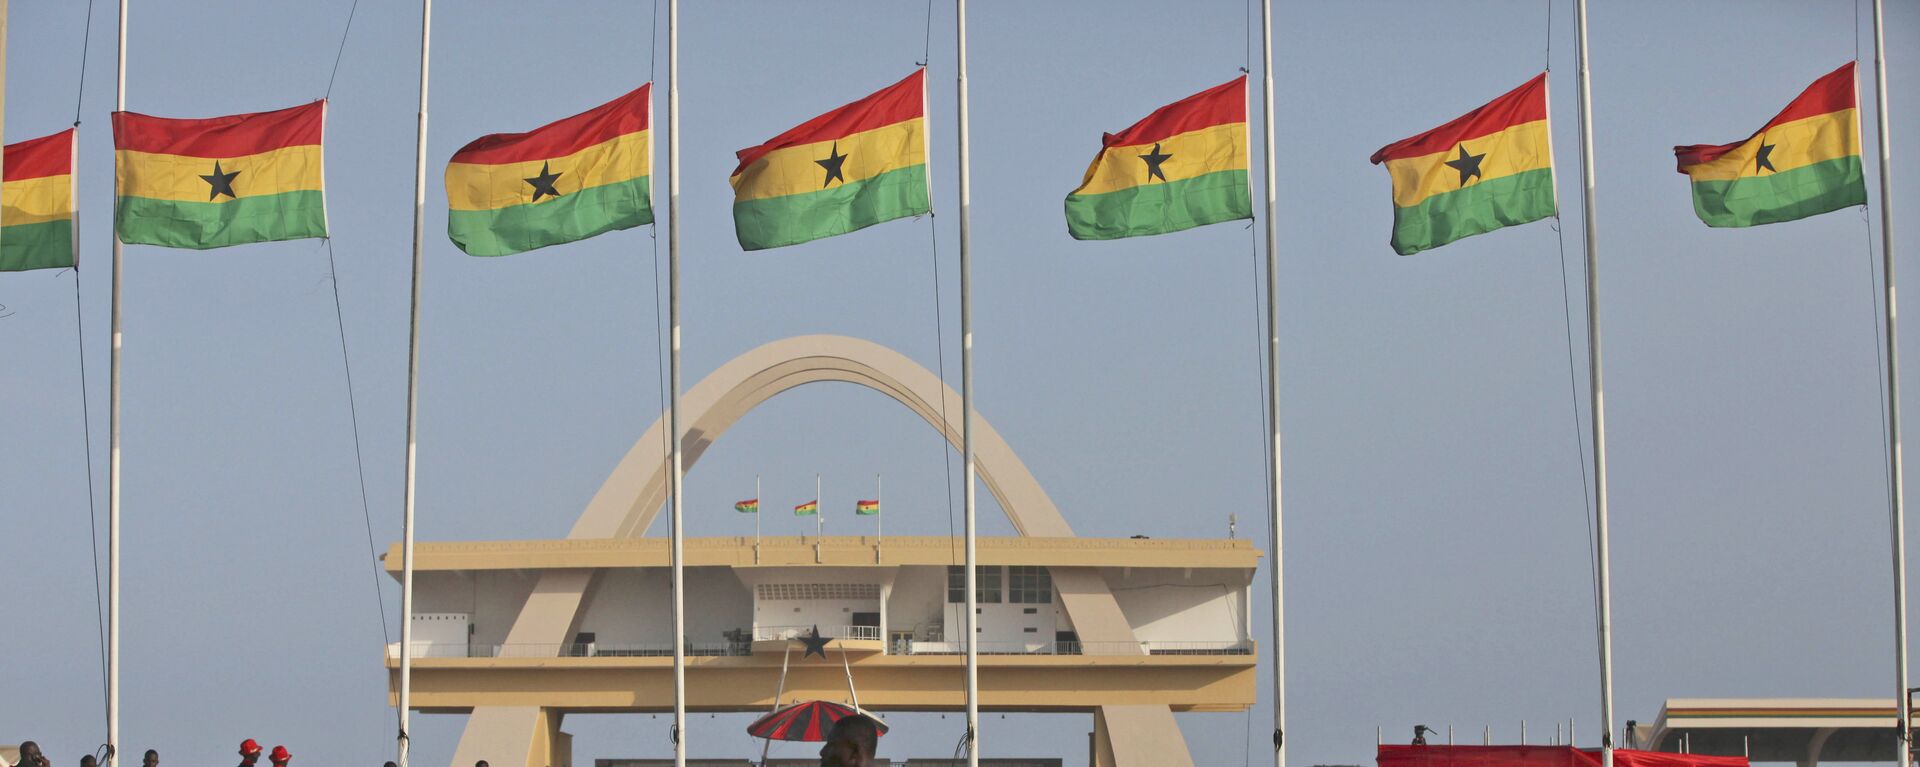 A man rides a bicycle past Ghanian flags flown at half mast to honor late Ghanian President, John Evans Atta Mills at the independence square in Accra, Ghana, Thursday, Aug.9, 2012.  - Sputnik International, 1920, 25.11.2021